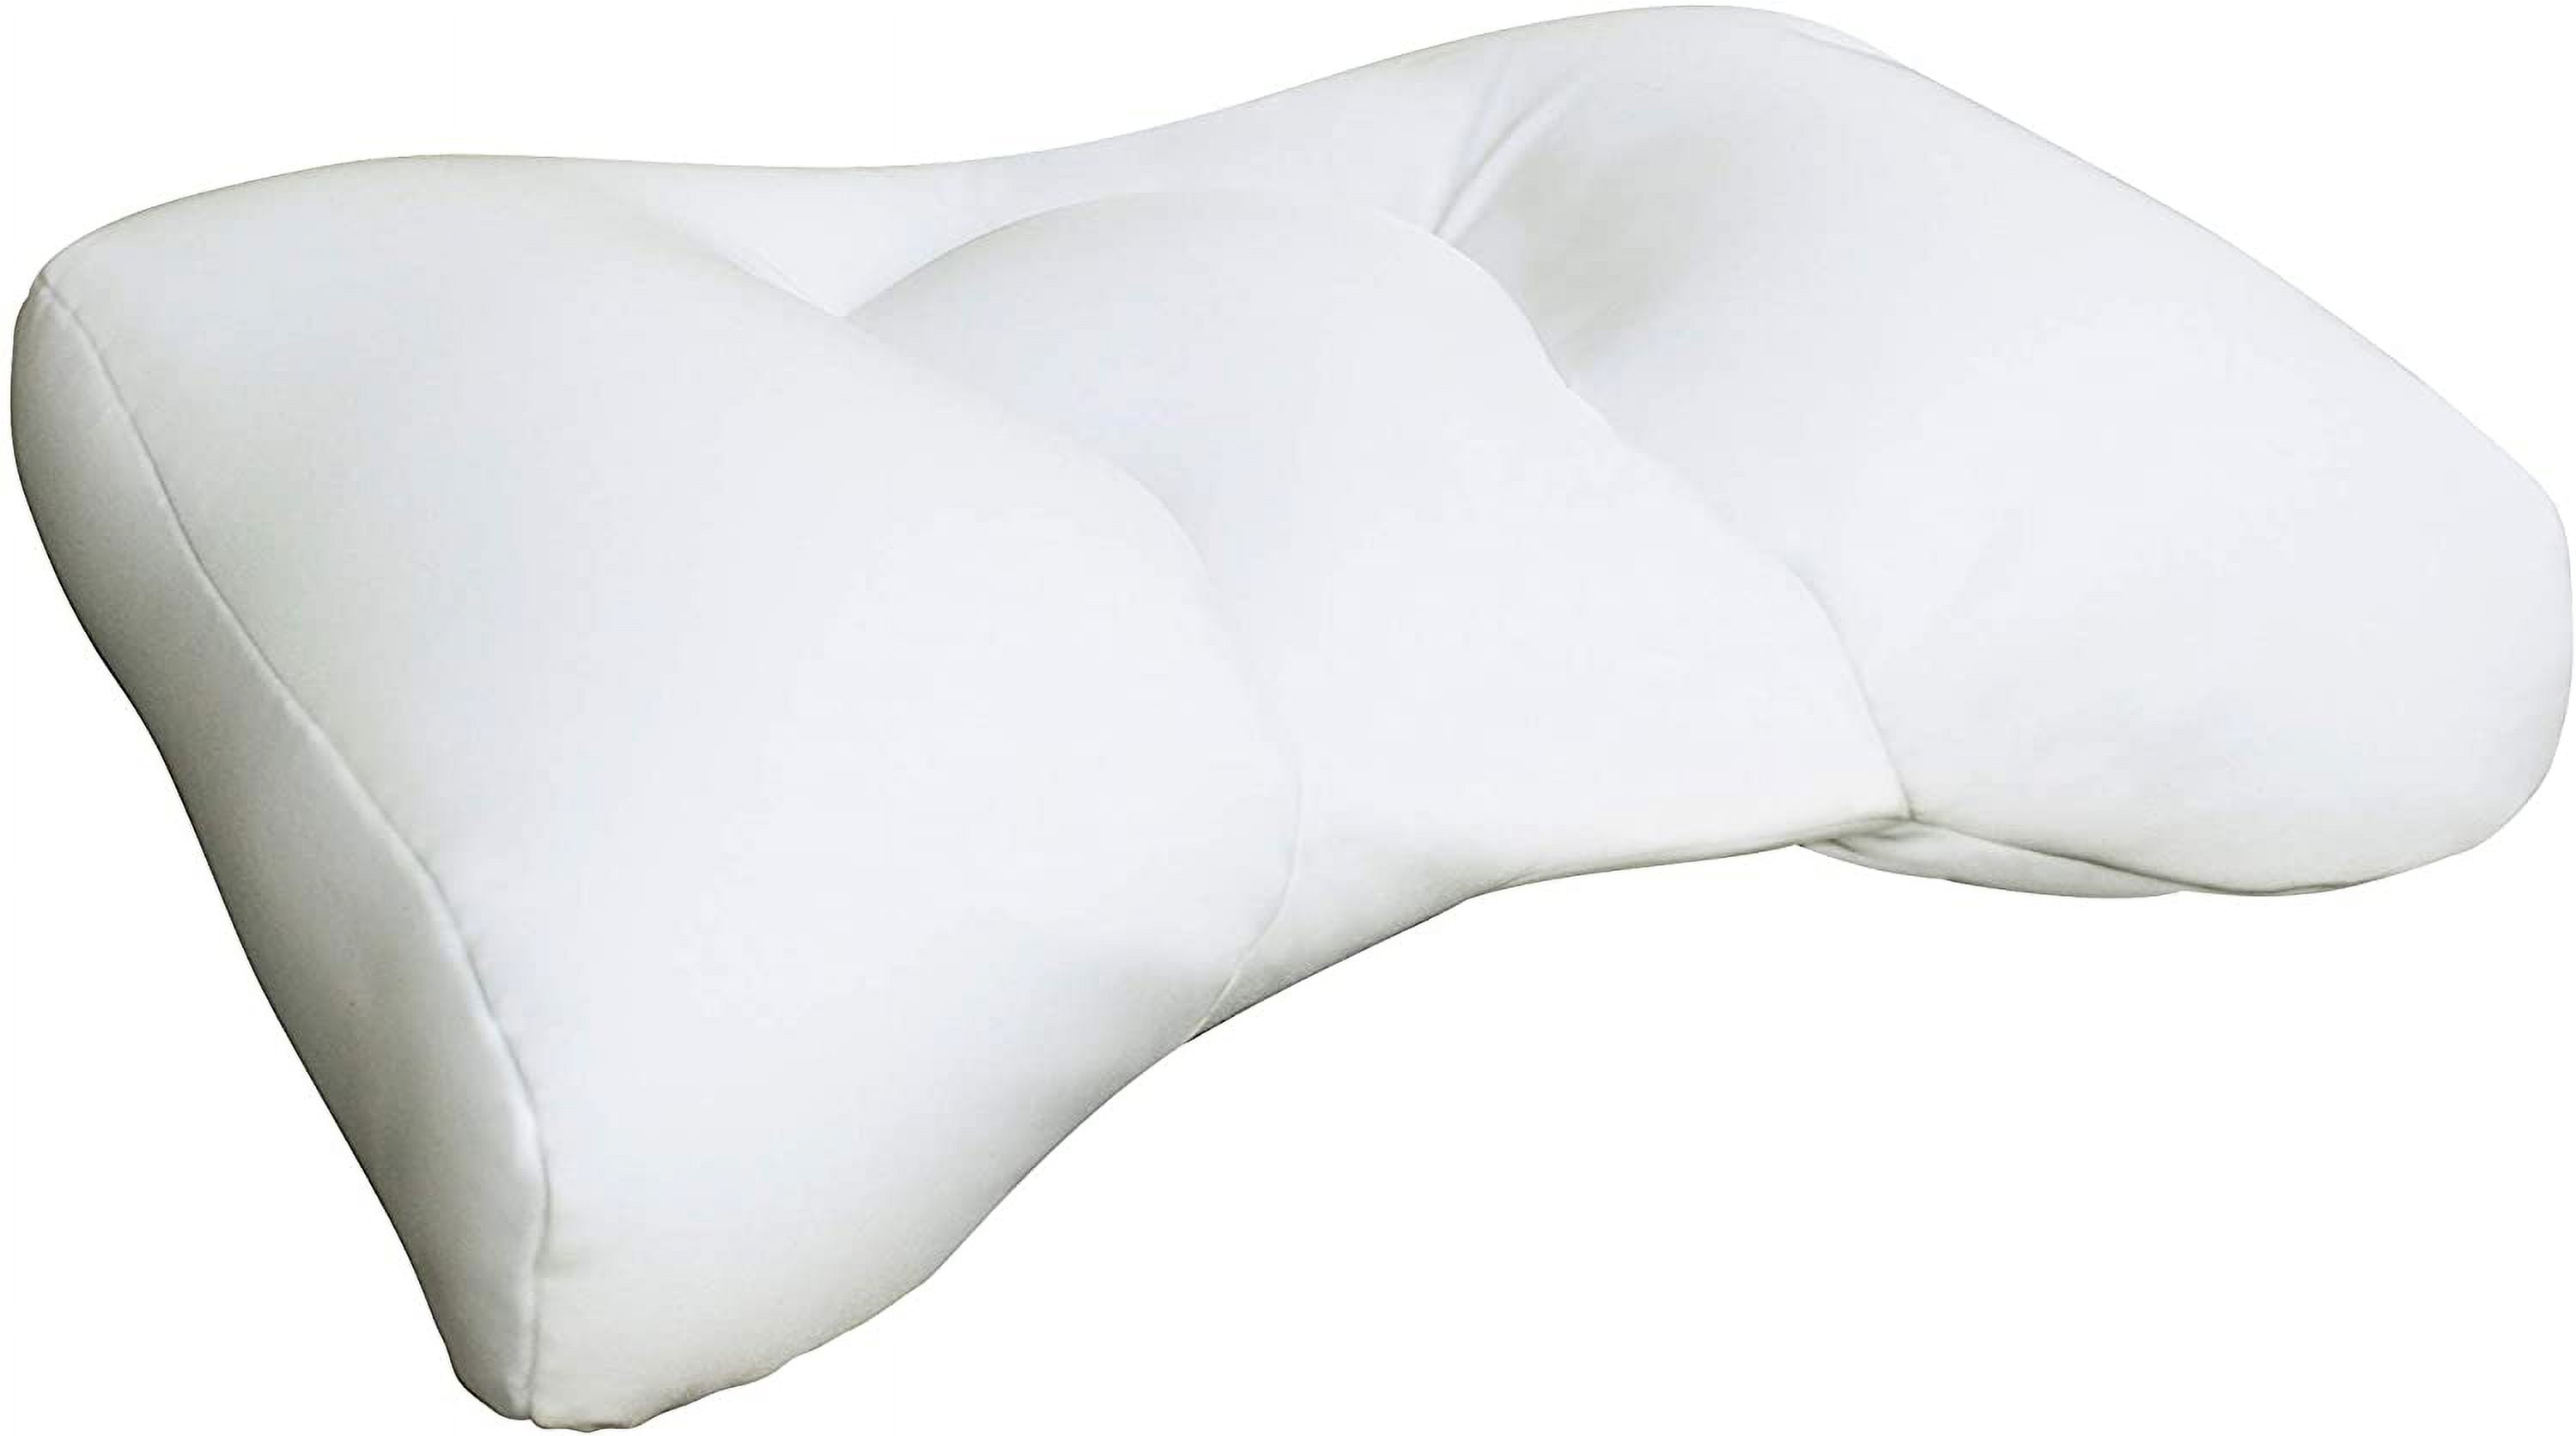 Sobakawa Cloud Pillow with Micro Bead Fill - White - Maximum Air Flow and  Comfort While Retaining Shape - Contour Supports Your Neck and Head to  Relieve Muscle Tension - Custom Fit Case